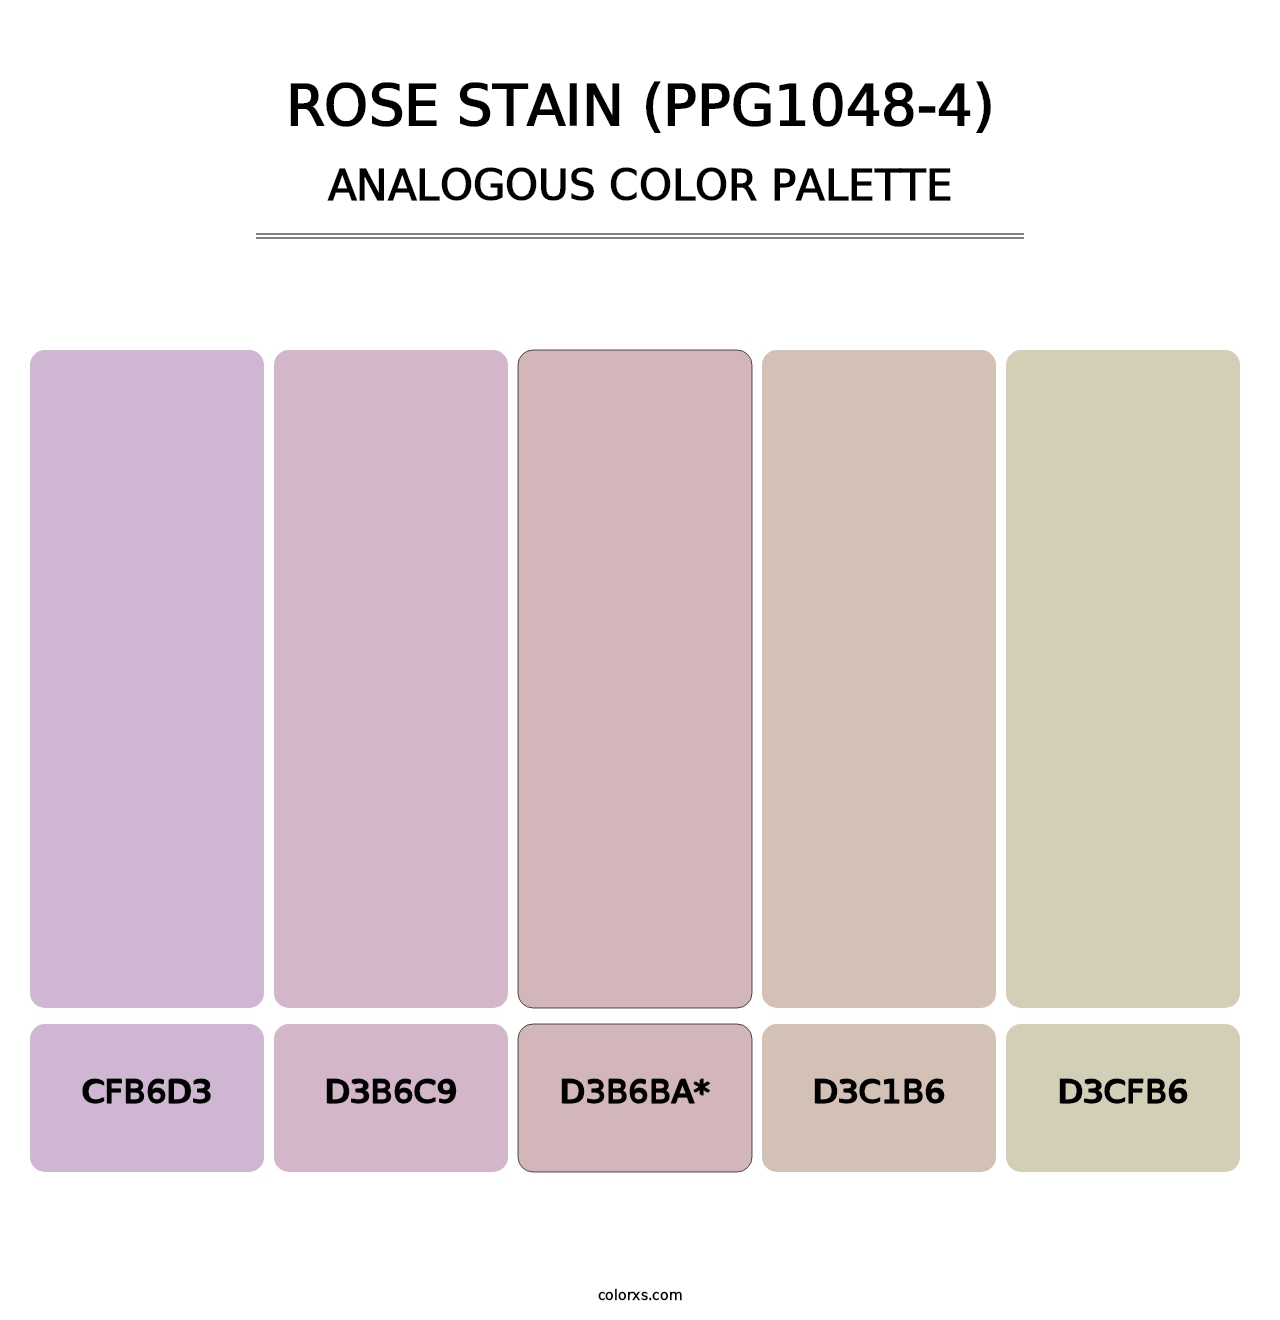 Rose Stain (PPG1048-4) - Analogous Color Palette